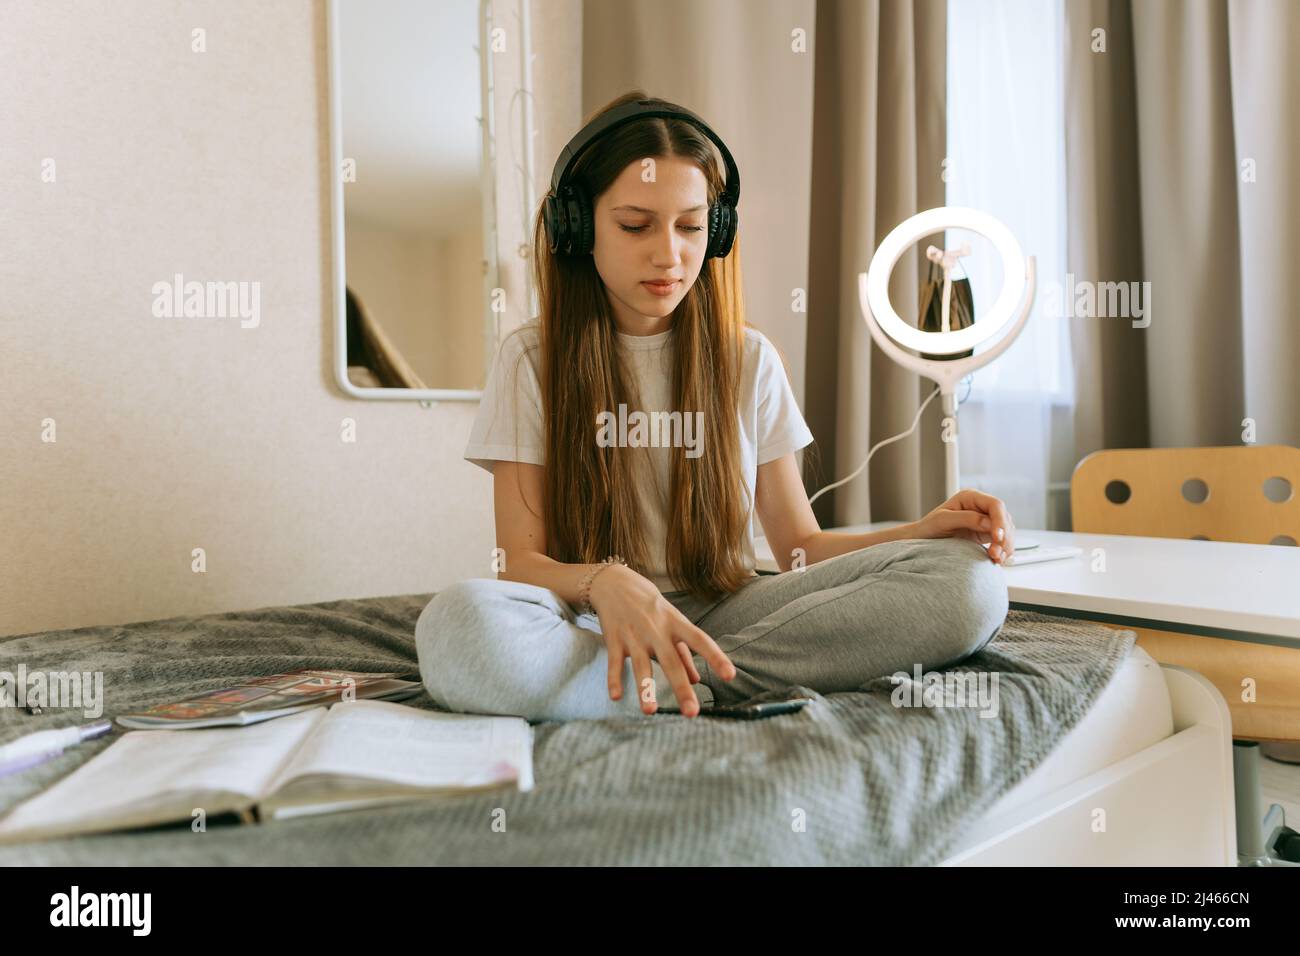 Young teenage girl in headphones and with smartphone is doing homework sitting on bed. A girl of generation Z with long hair, she is studying intently Stock Photo